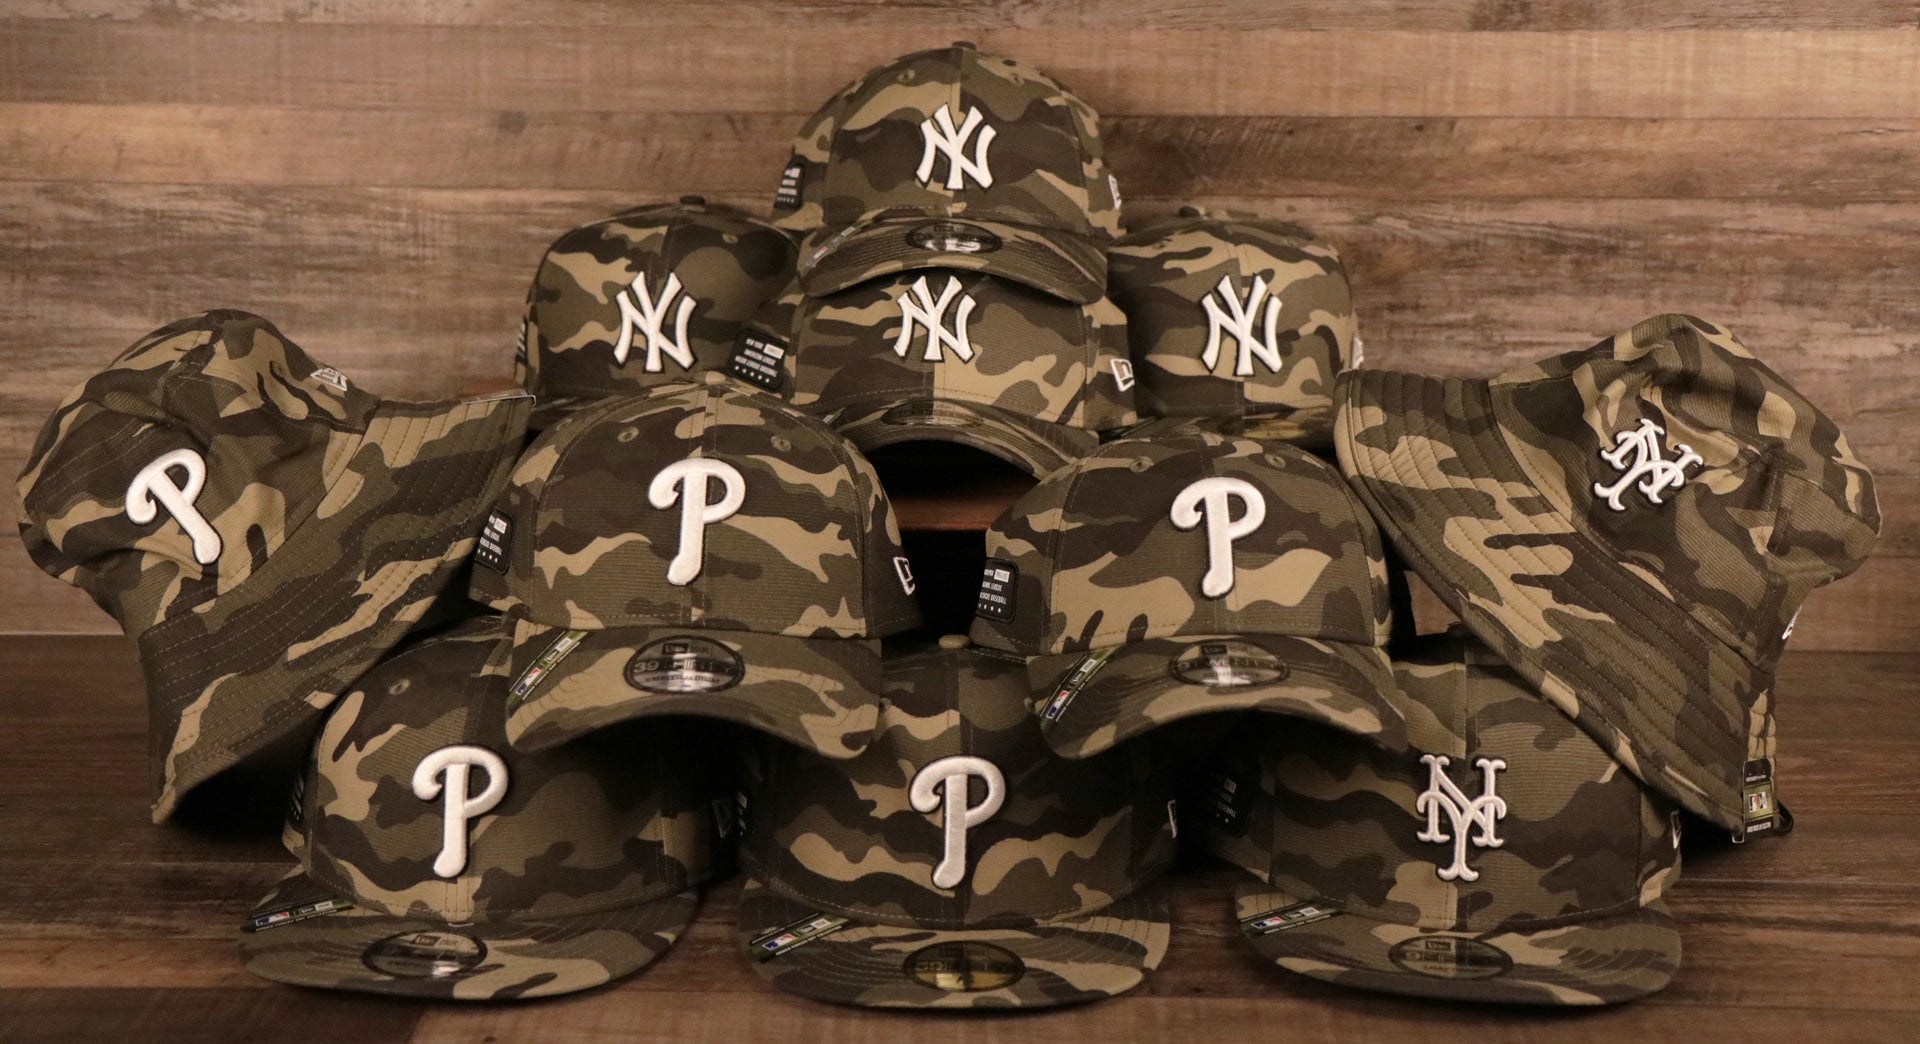 Camo New Era Hats for the 2021 Armed Forces Day